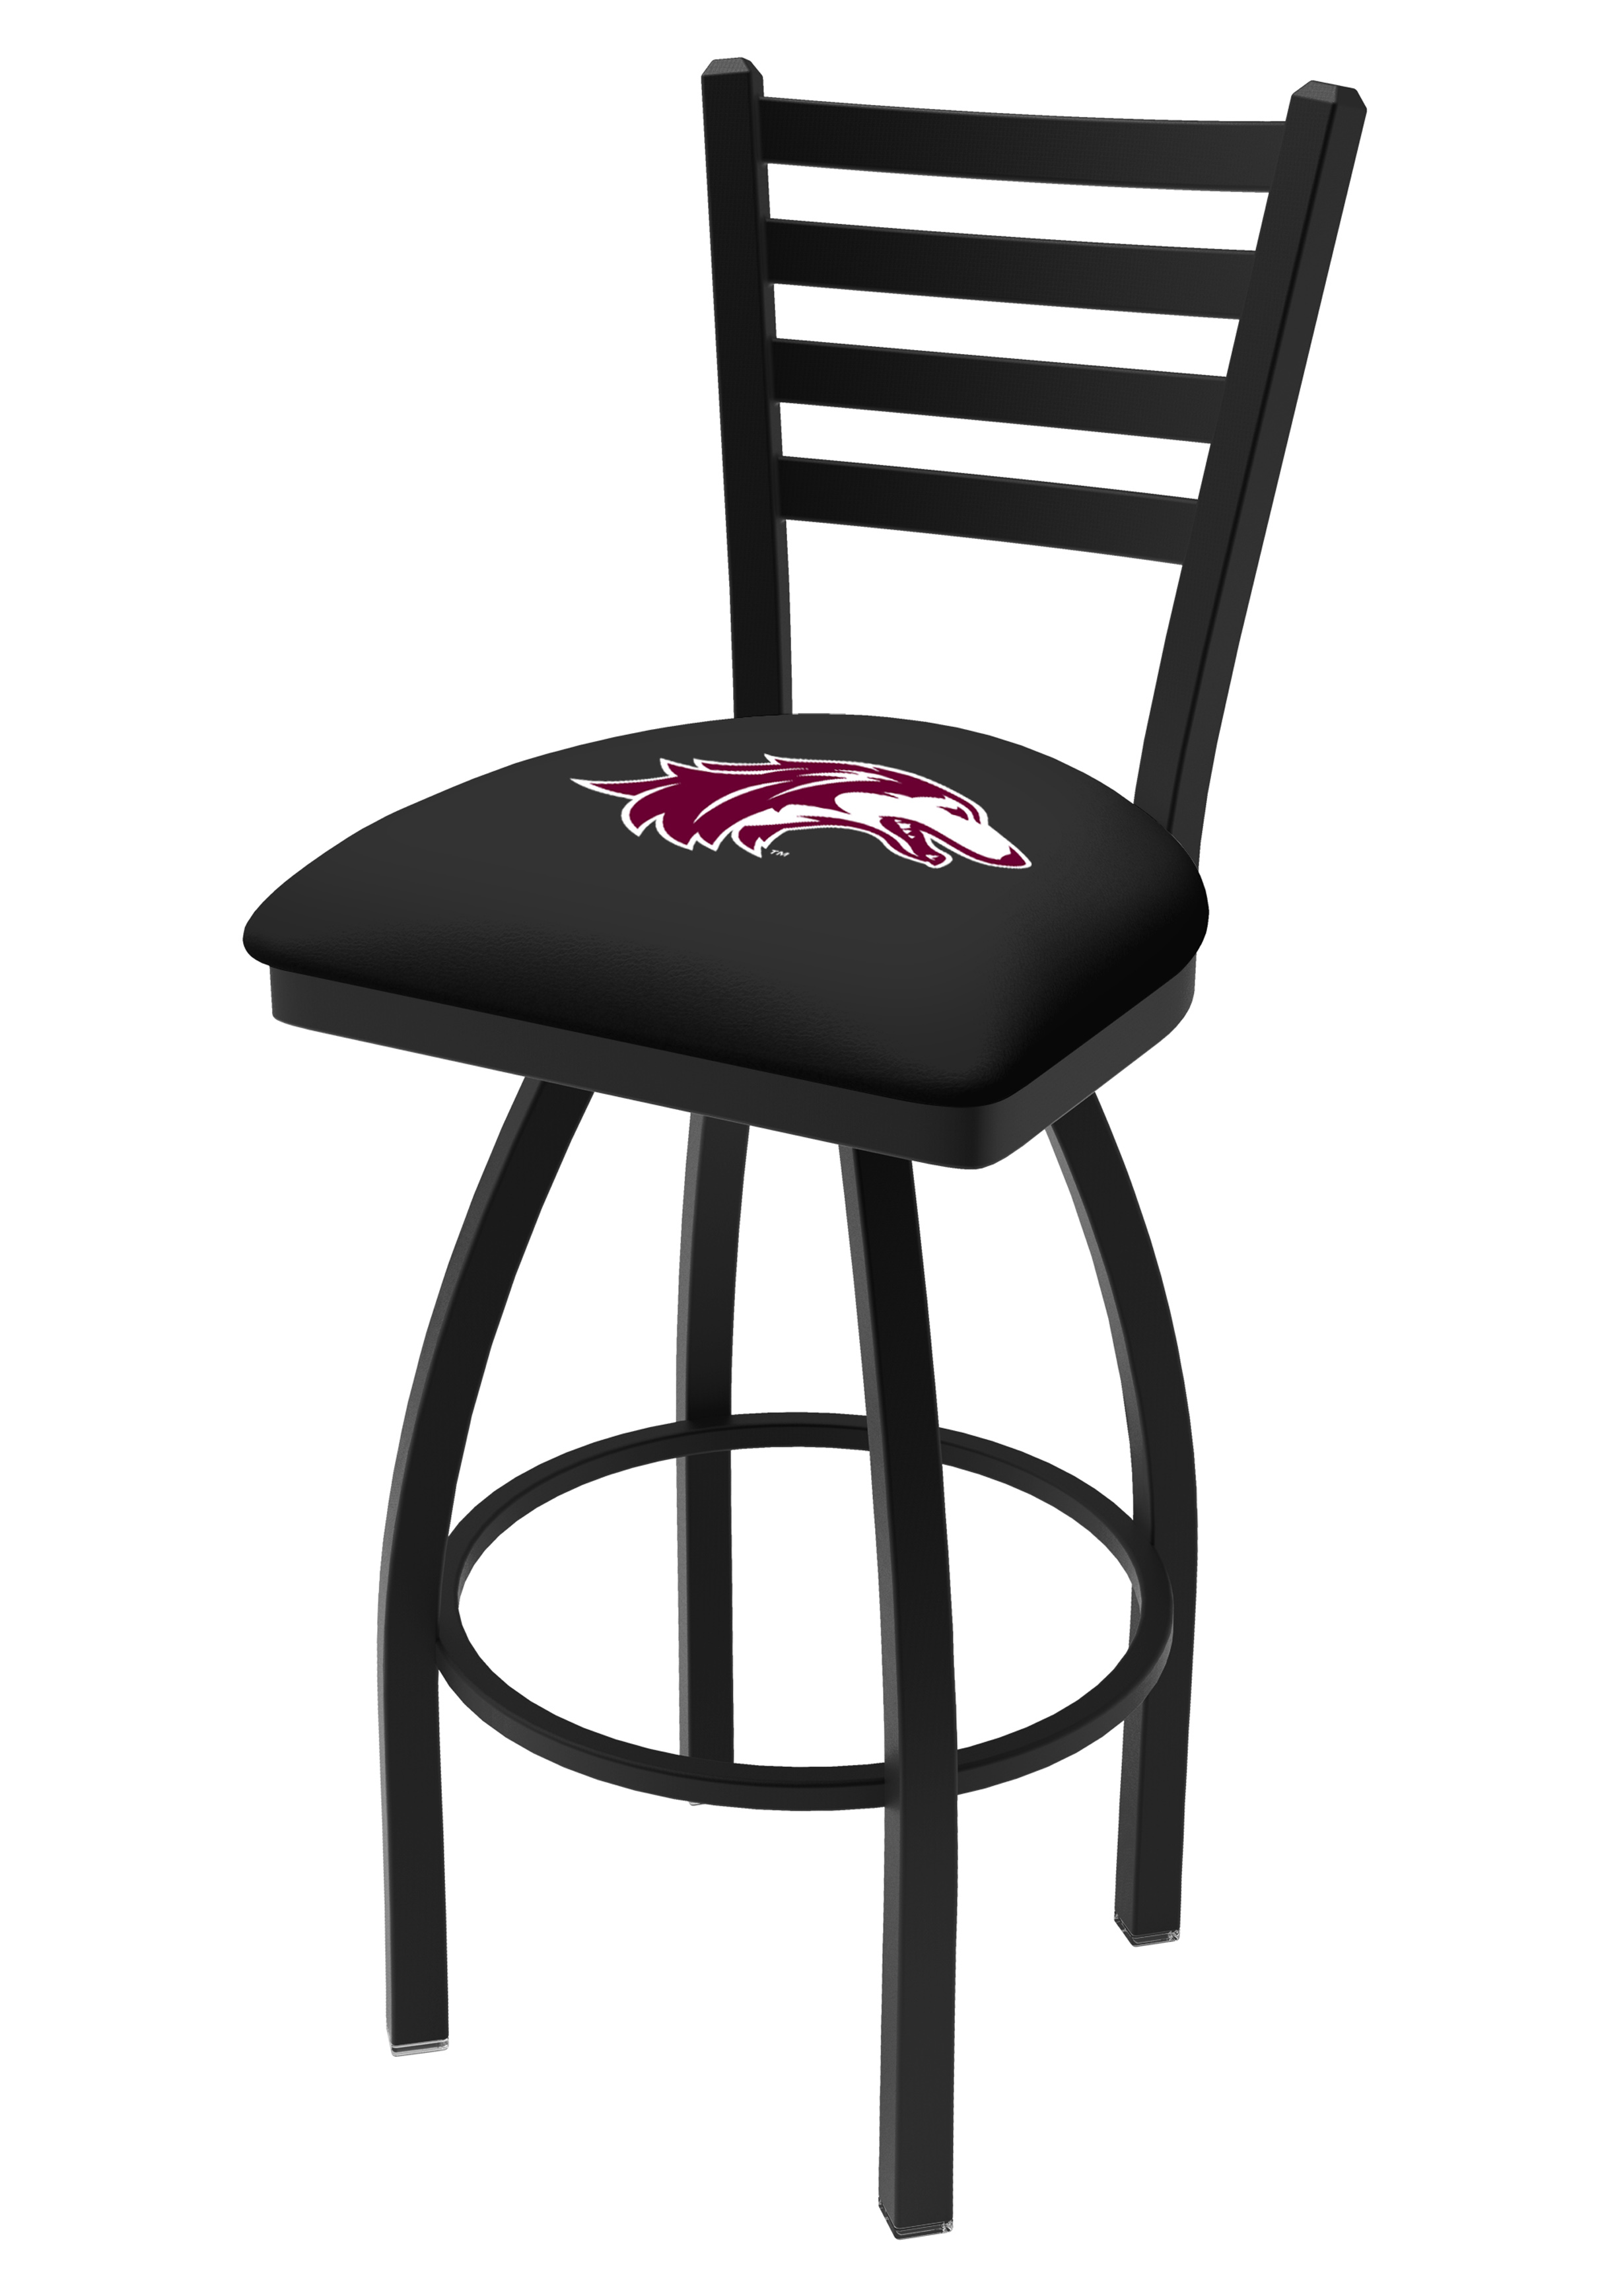 Picture of Holland Bar Stool L01425SouIll 25 in. Wrinkle Southern Illinois Bar Stool with Ladder Style Back